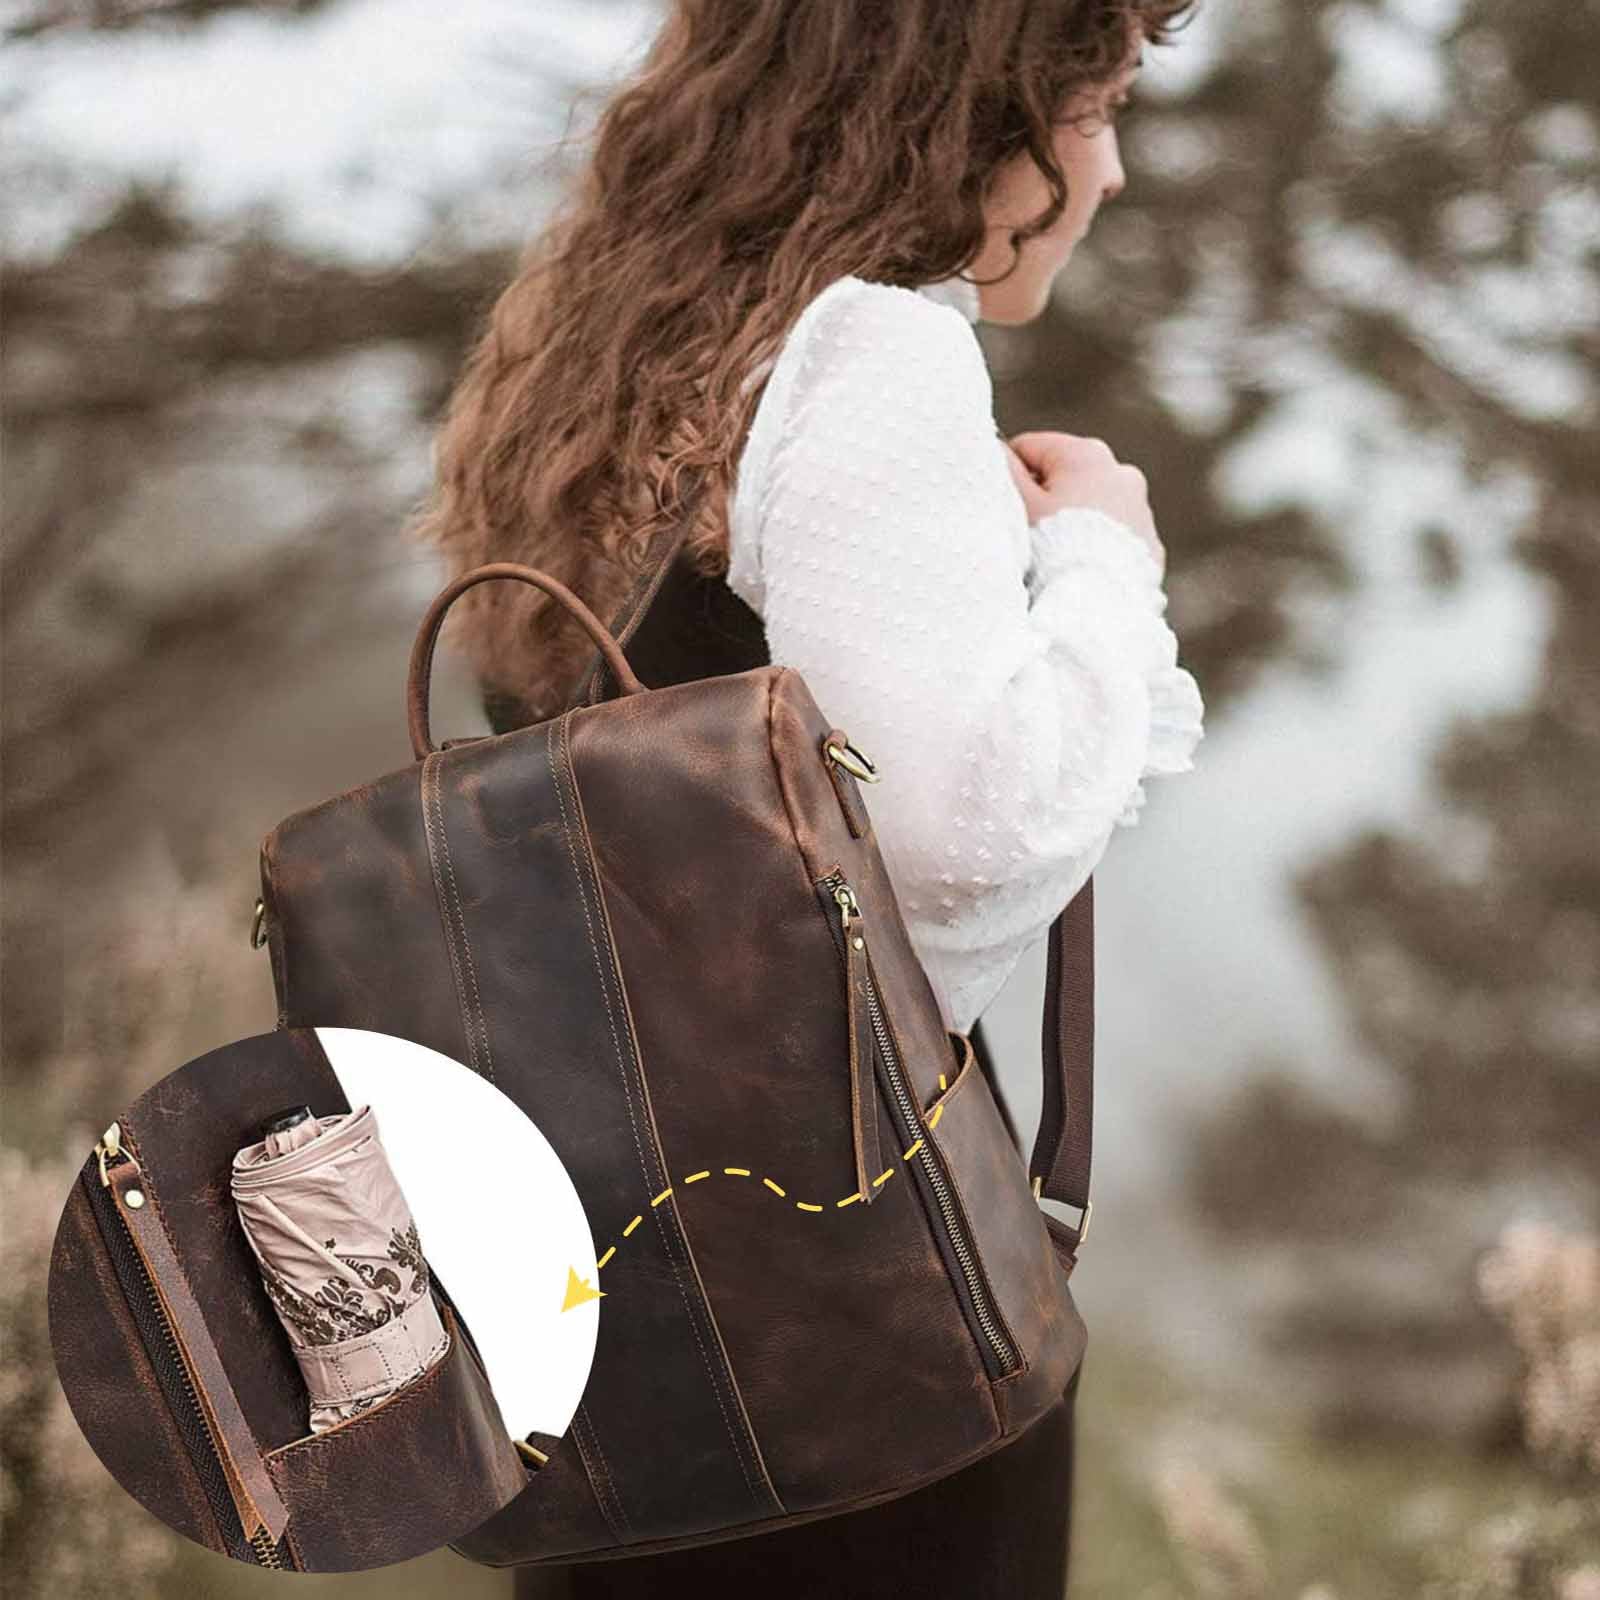 Anti-Theft Vintage Leather Backpack